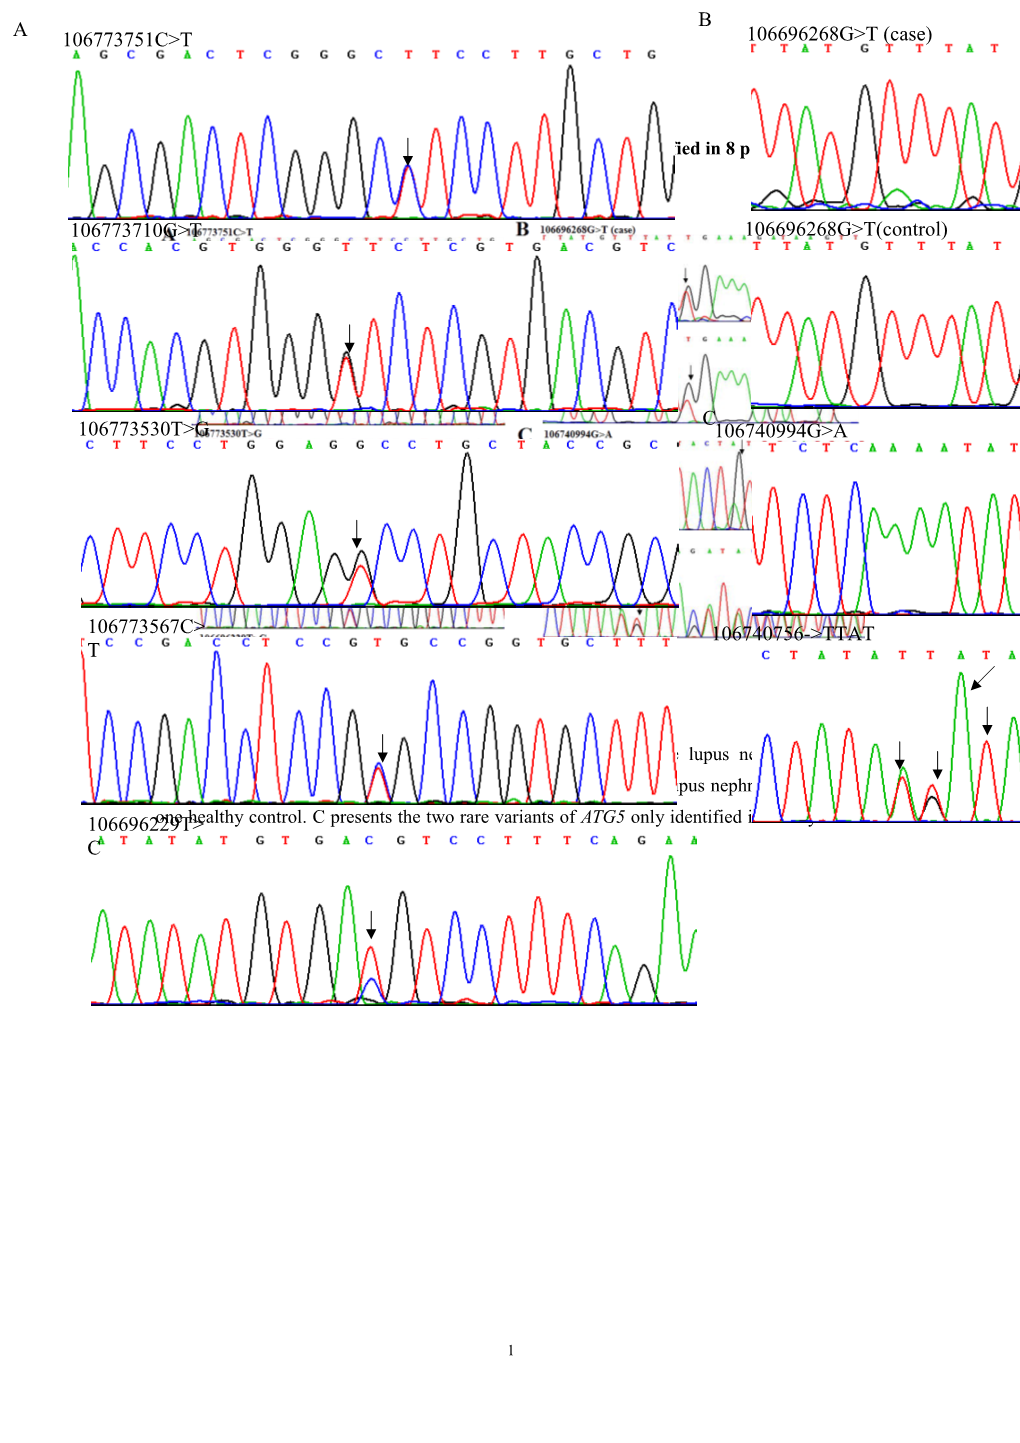 Supplementary Fig1. the Sequence Rare Variants of ATG5 Identified in 8 Patients and One